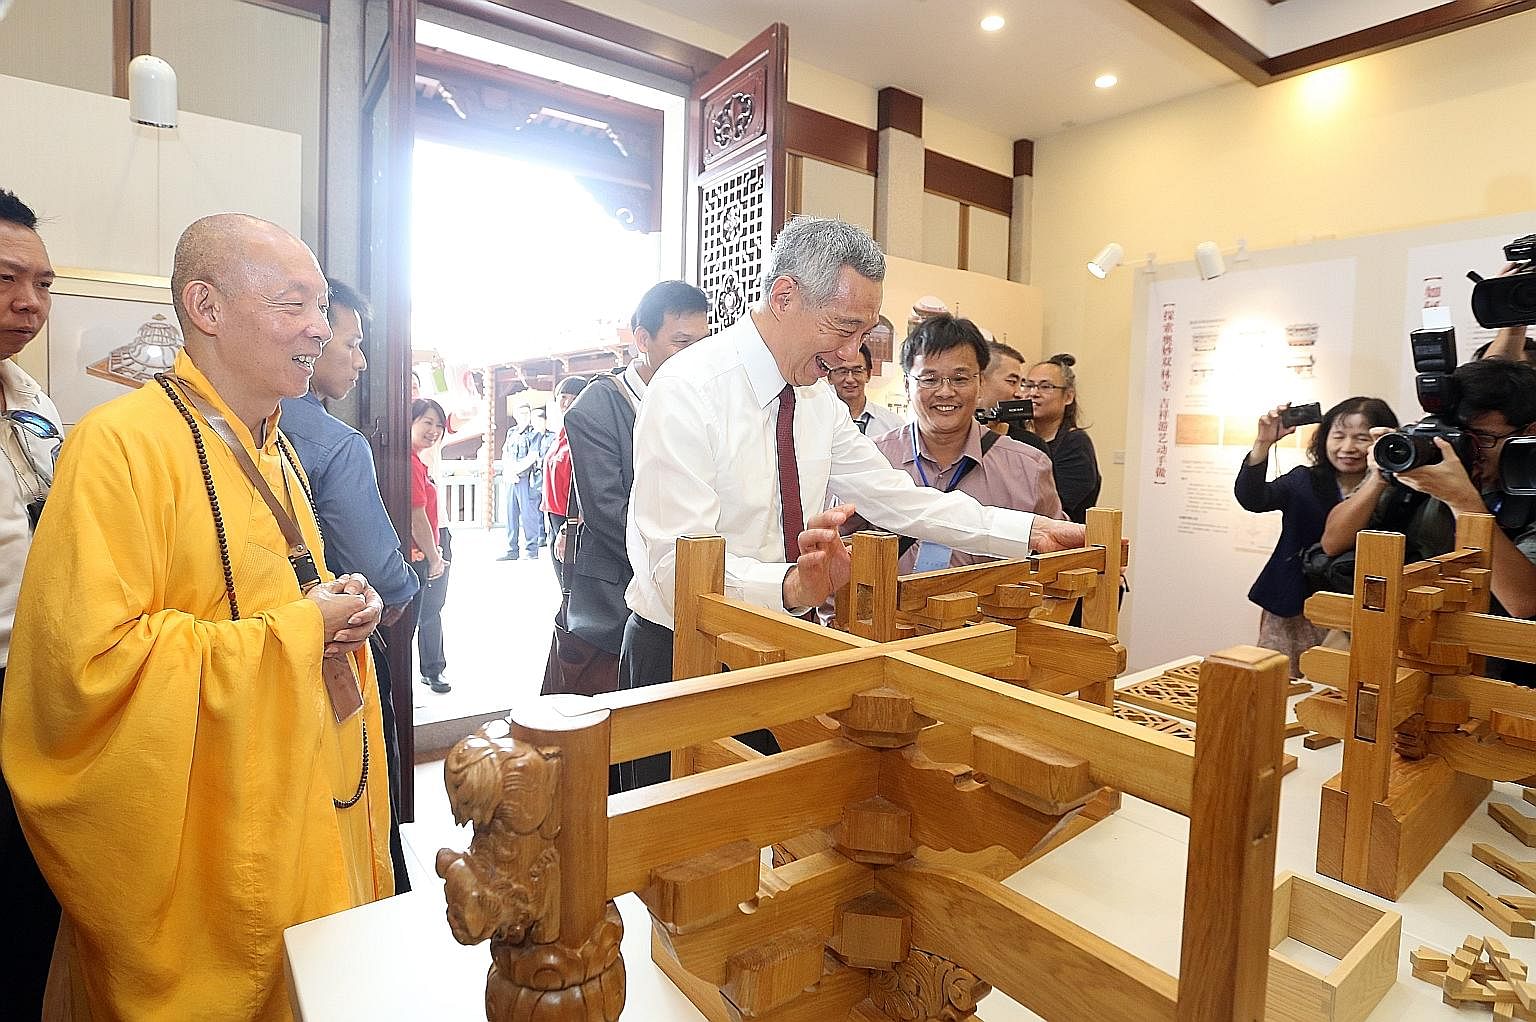 Above: The Meditation Hall is among the new halls added in the $20 million second phase of the Lian Shan Shuang Lin Monastery's restoration programme. Left: PM Lee trying out the wooden structures in the Dharma Hall at the monastery in Kim Keat yeste